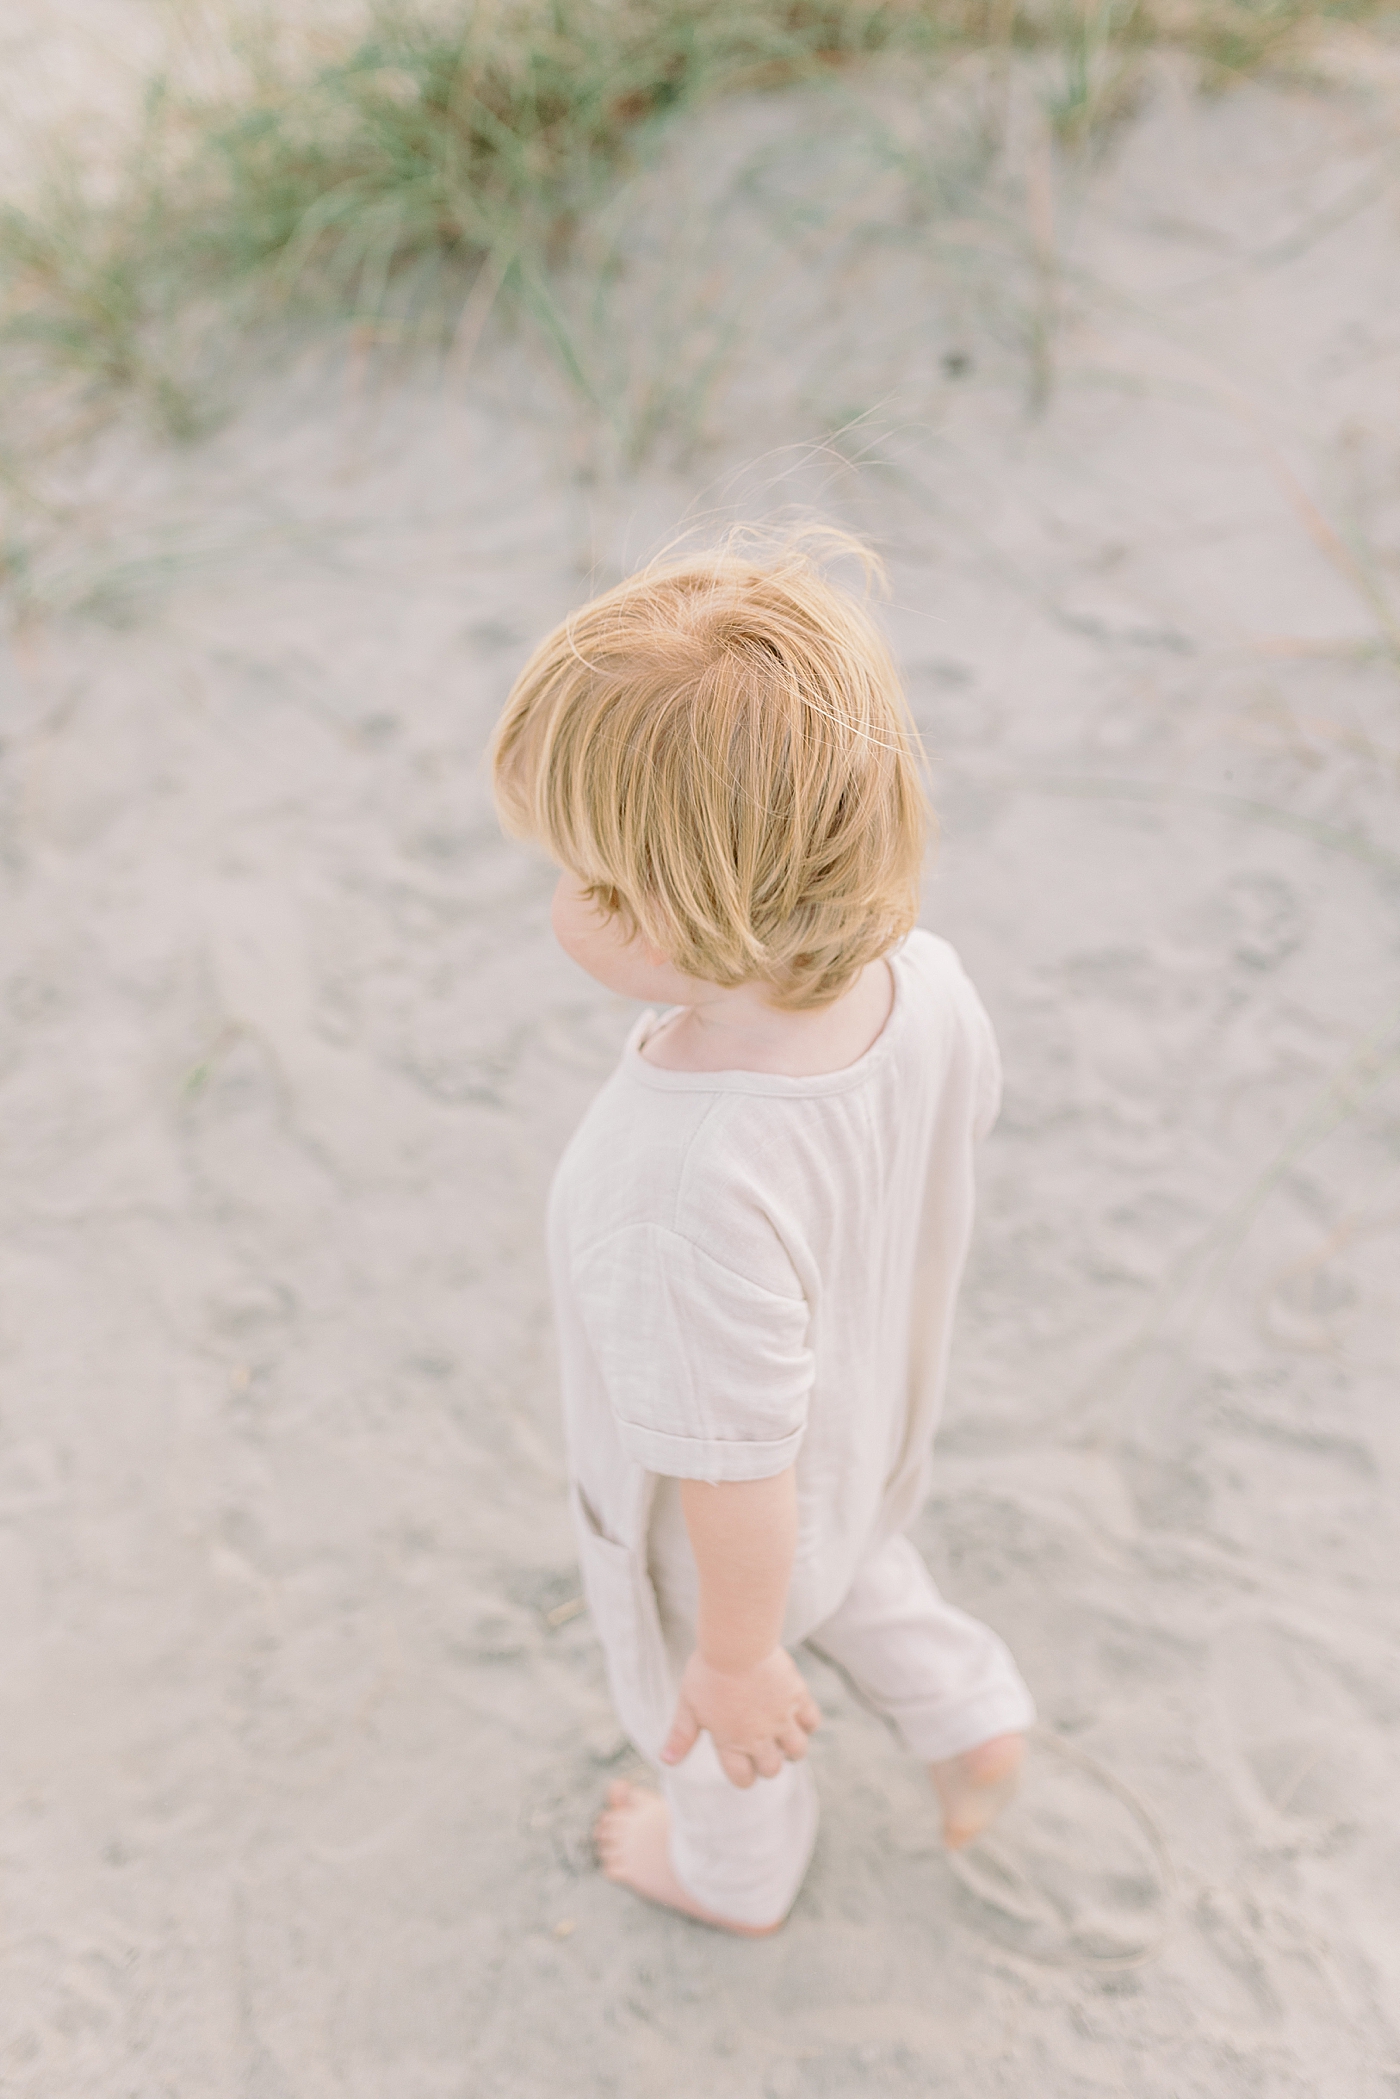 Detail of baby boys blonde hair | Photo by Caitlyn Motycka Photography